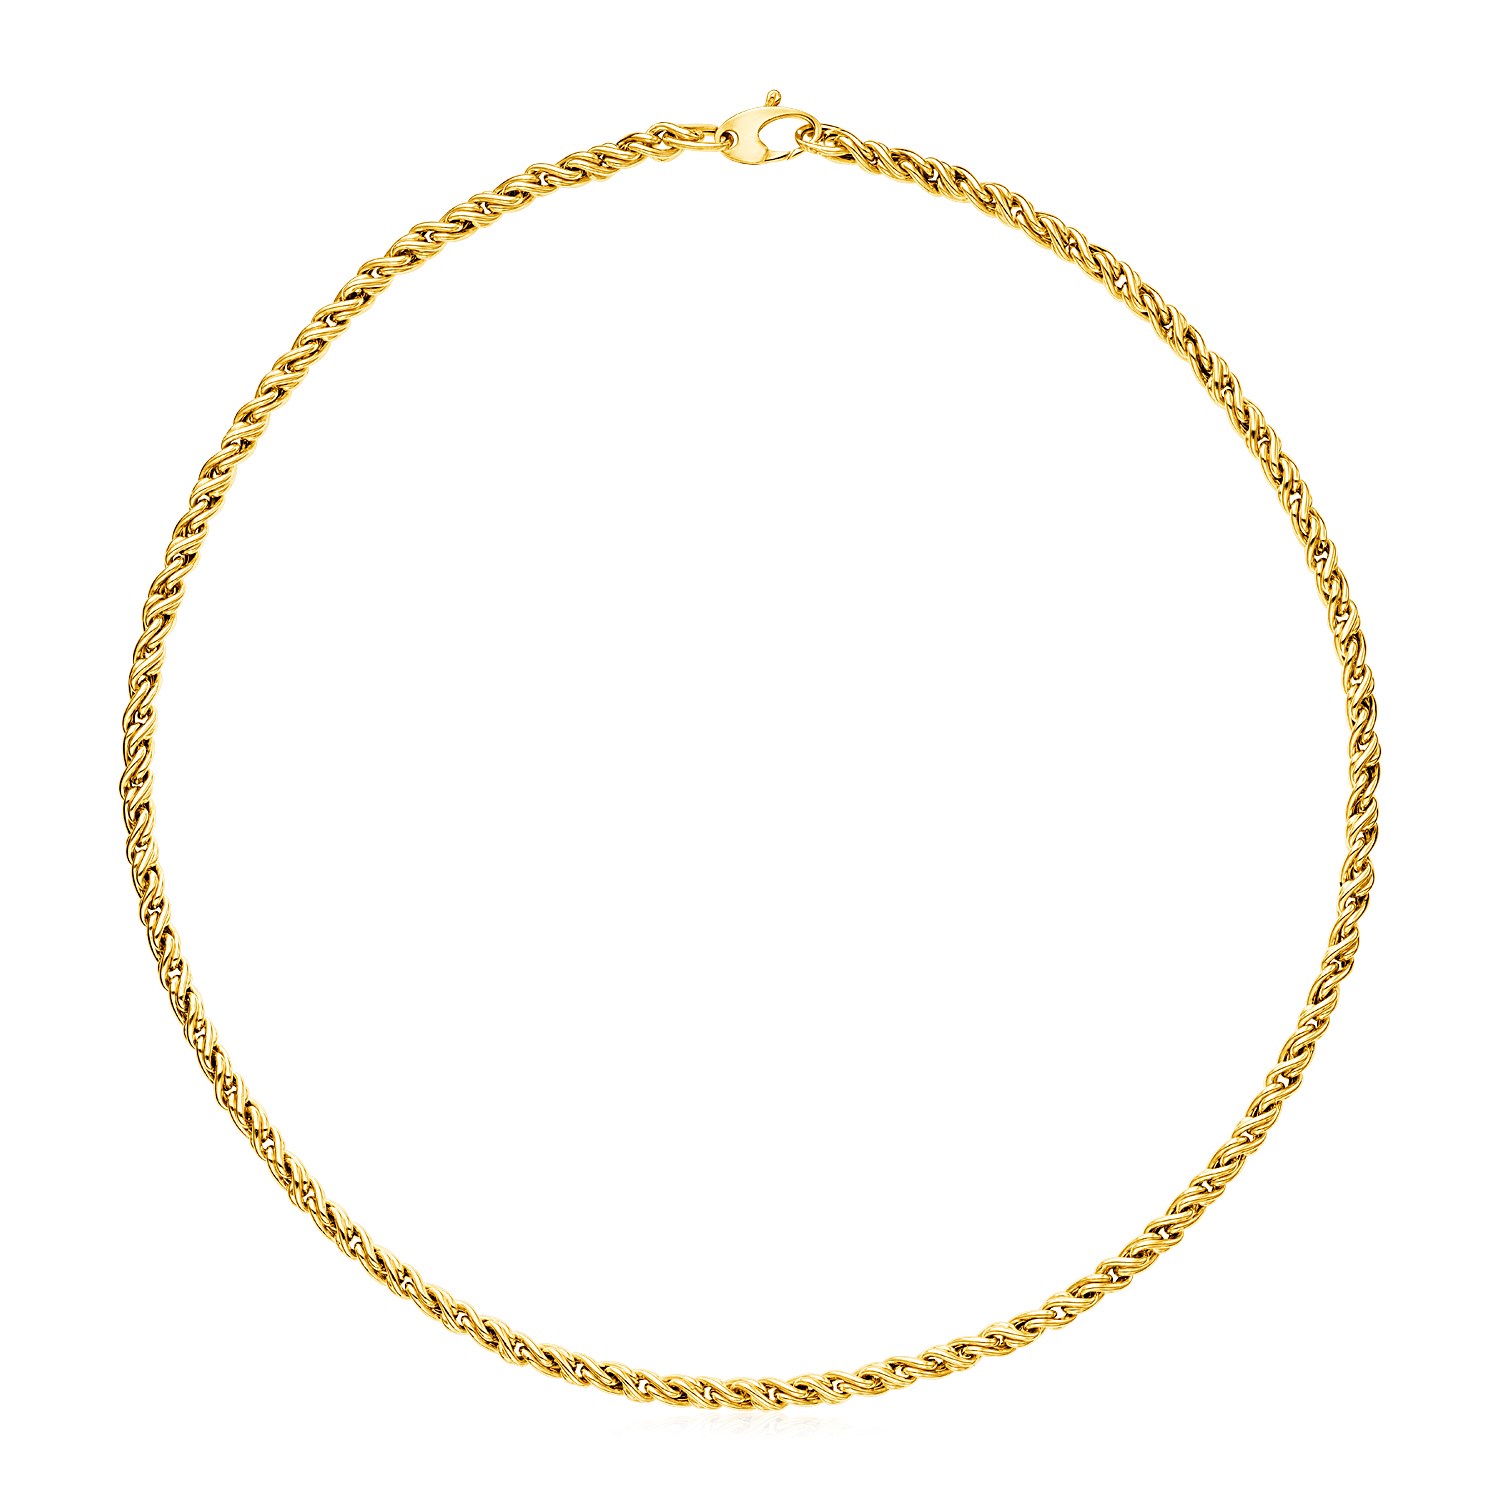 17-Inch 14K Gold 5-Strand Knot Mesh Necklace